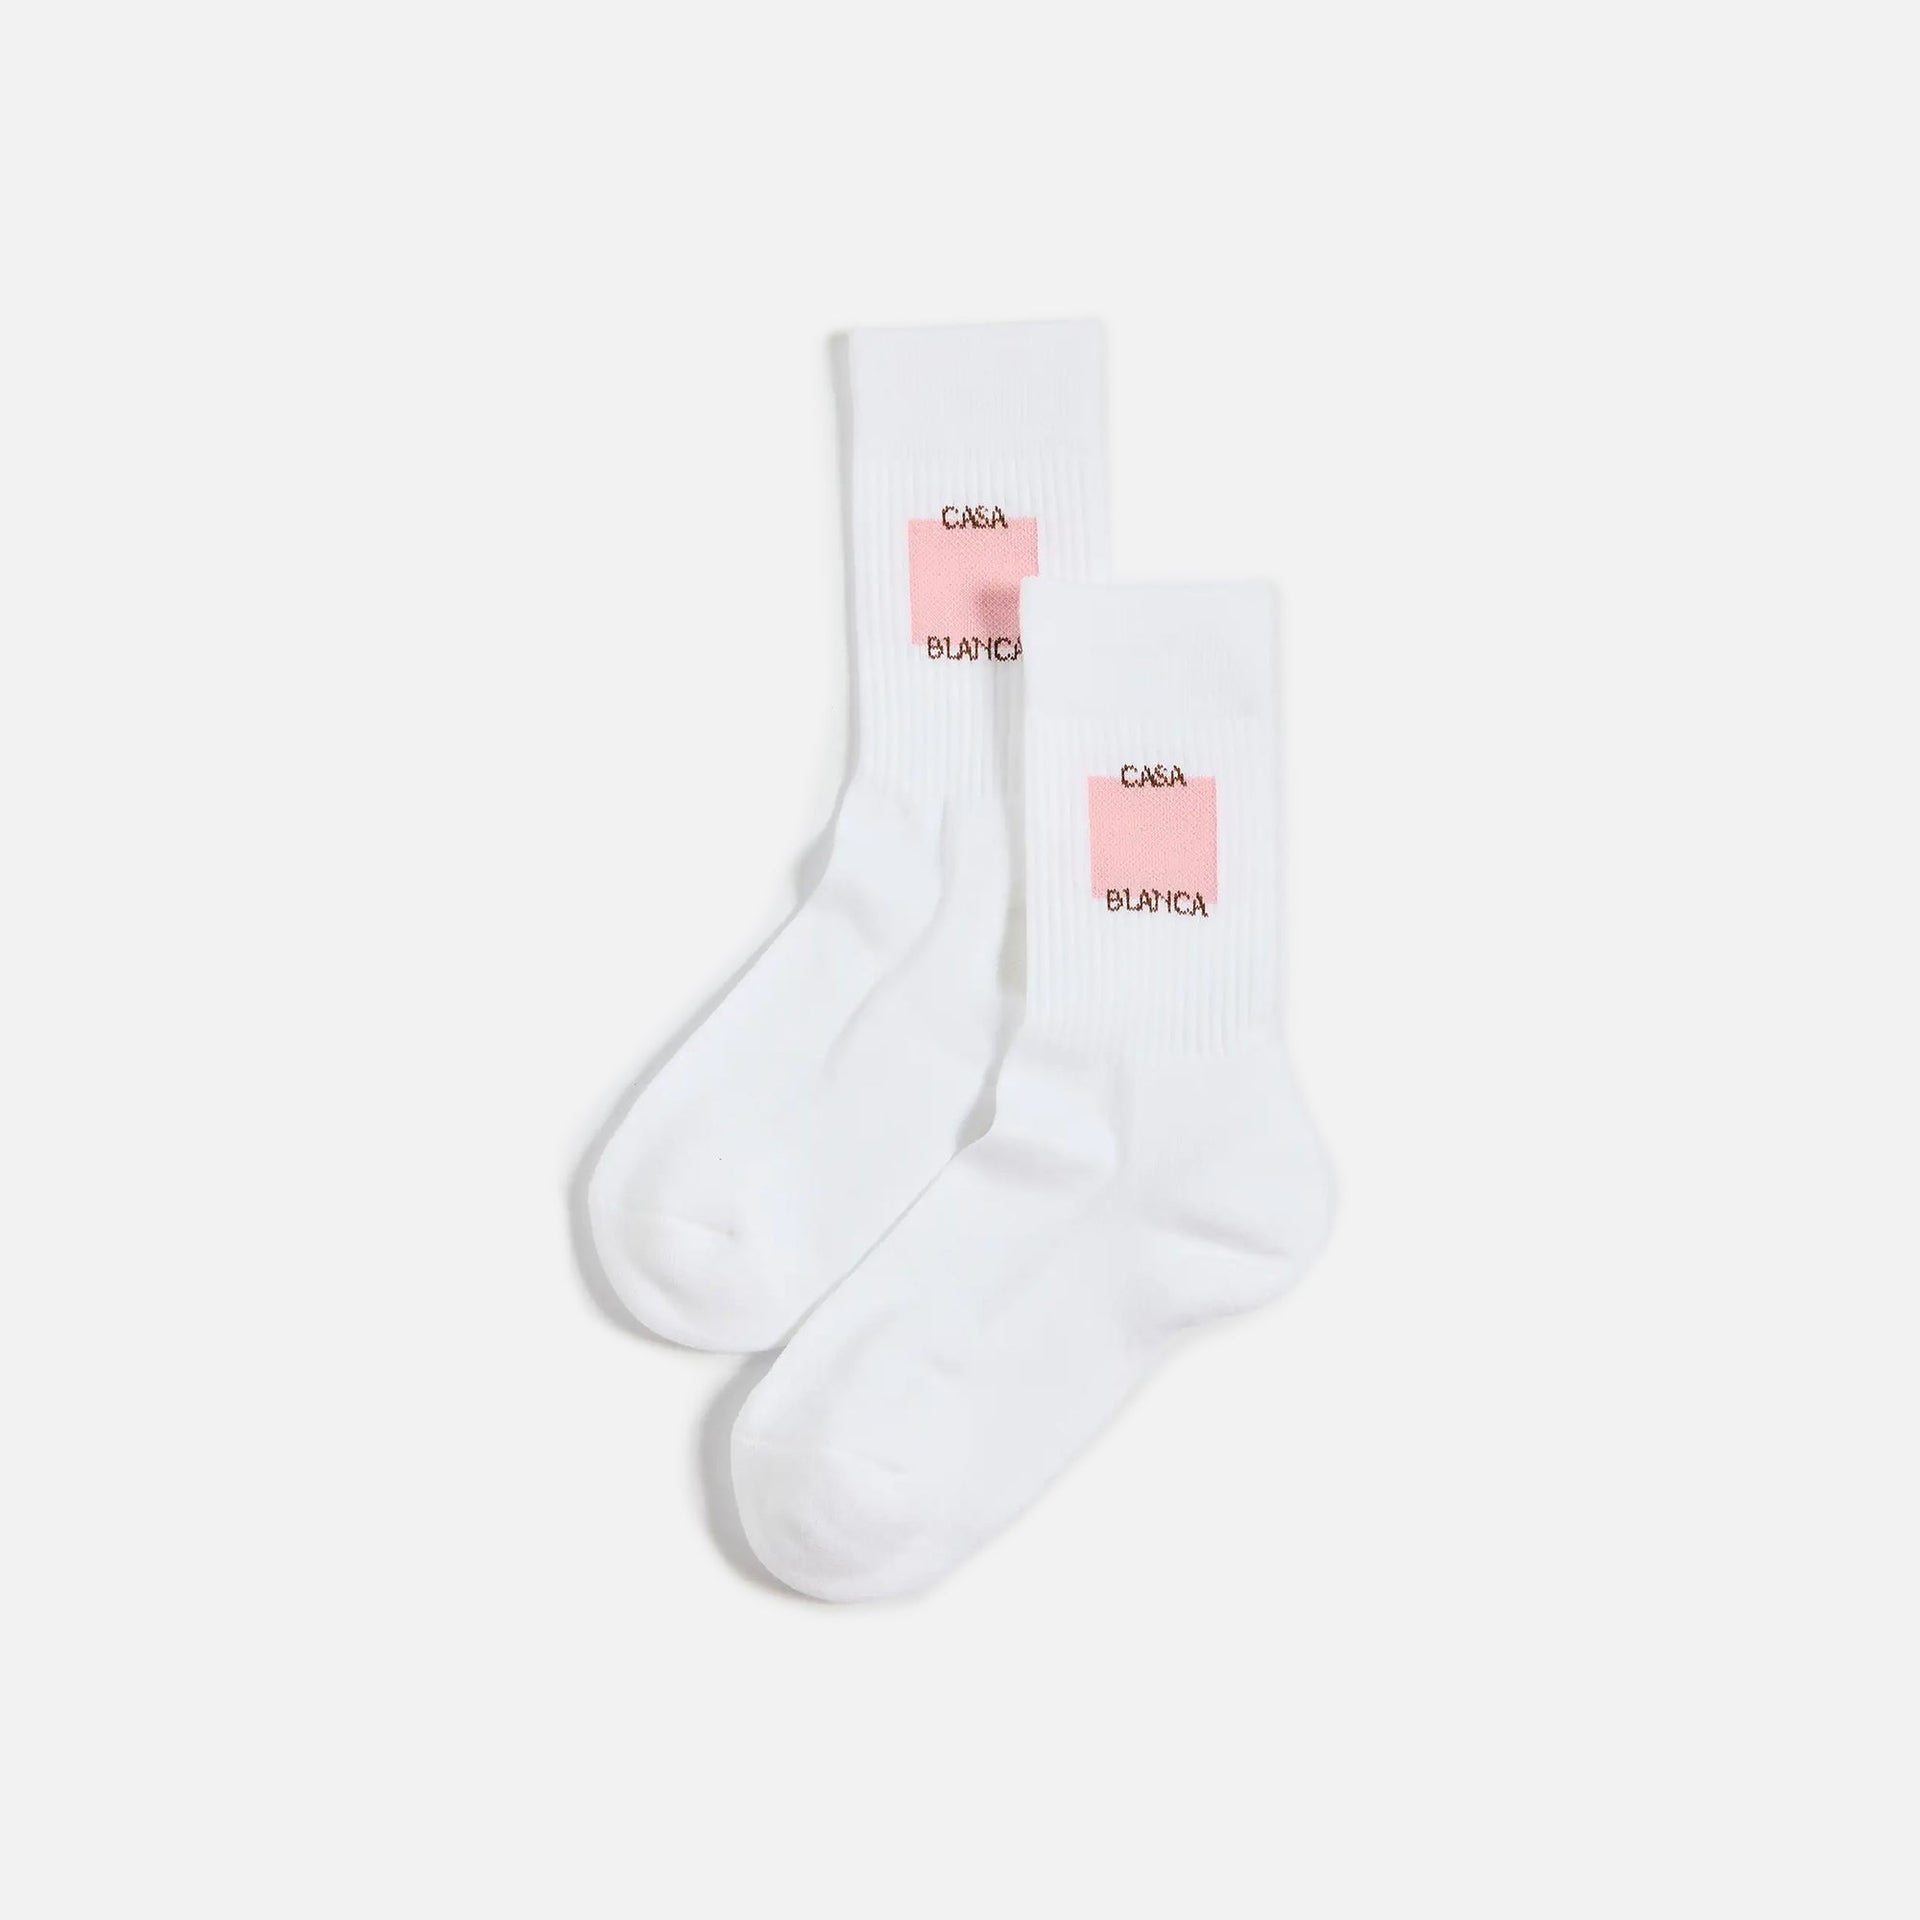 Casablanca Ribbed Sport Sock with Casa Logo - Pale Pink